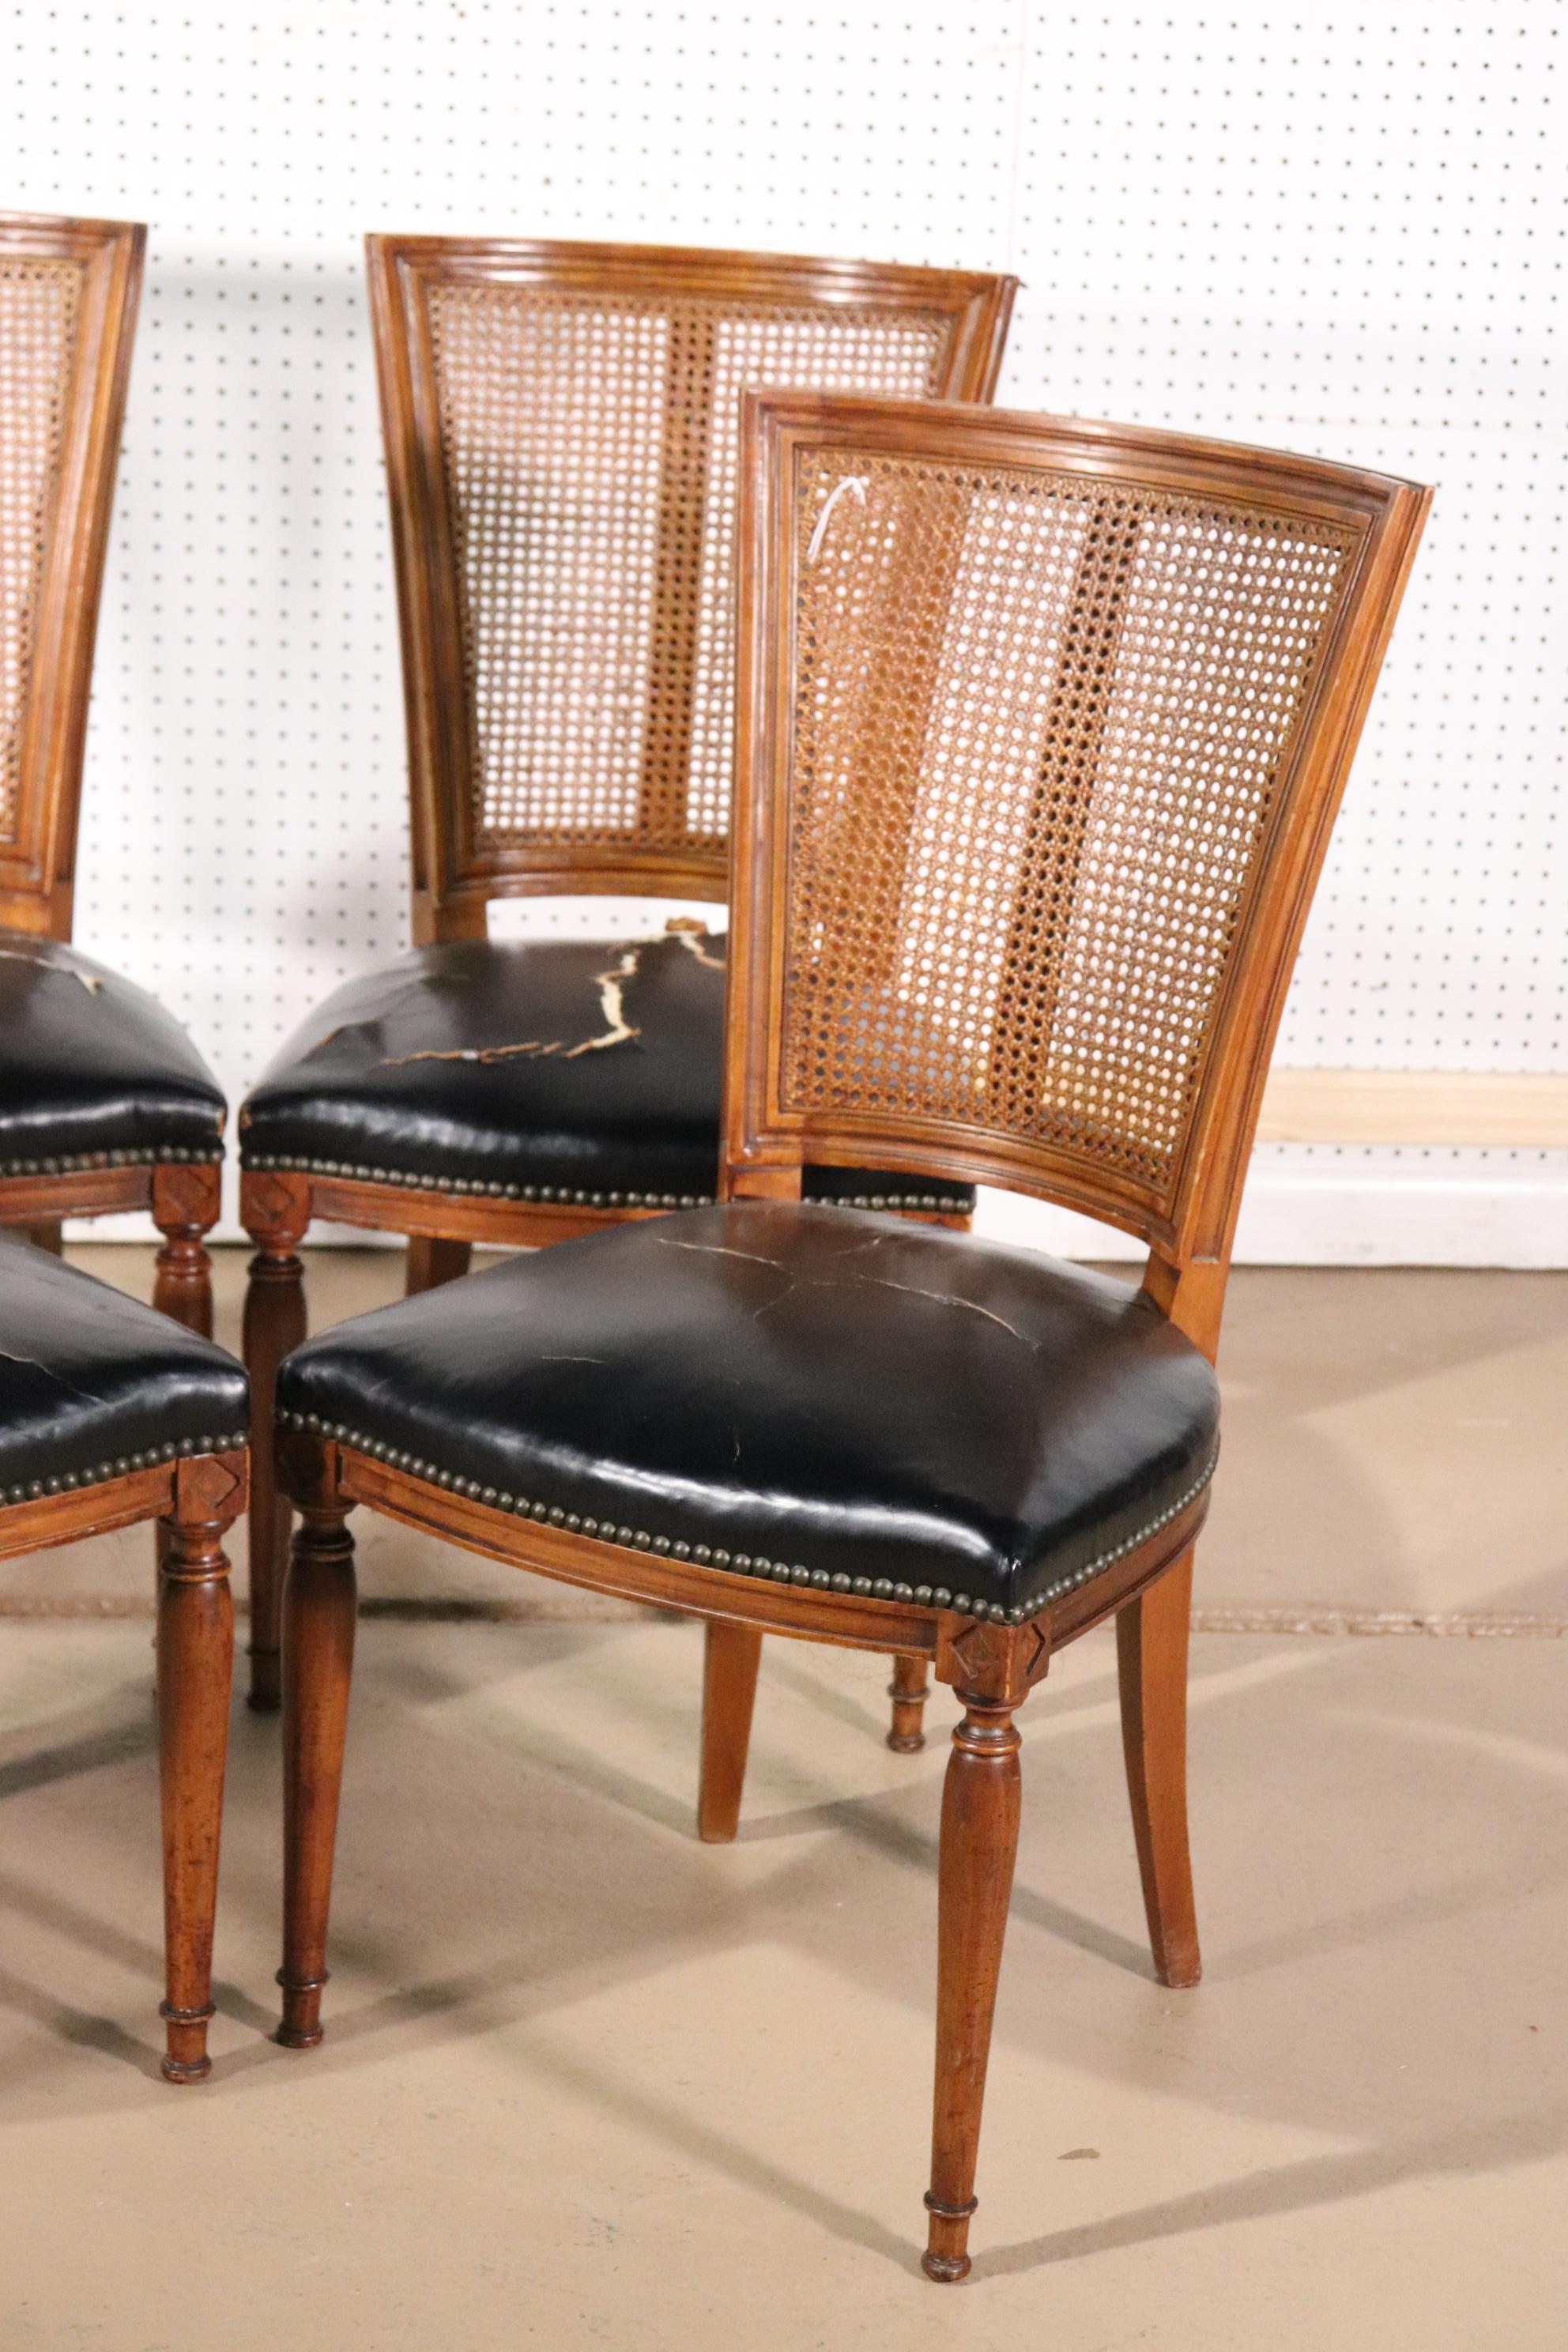 These dining chairs have beautiful cane backs and leather that has worn through in places. However this can be reupholstered or lived with. The chairs date to the 1940s and measure 37 tall x 22 deep x 20 wide x 18 inches for the seat height.